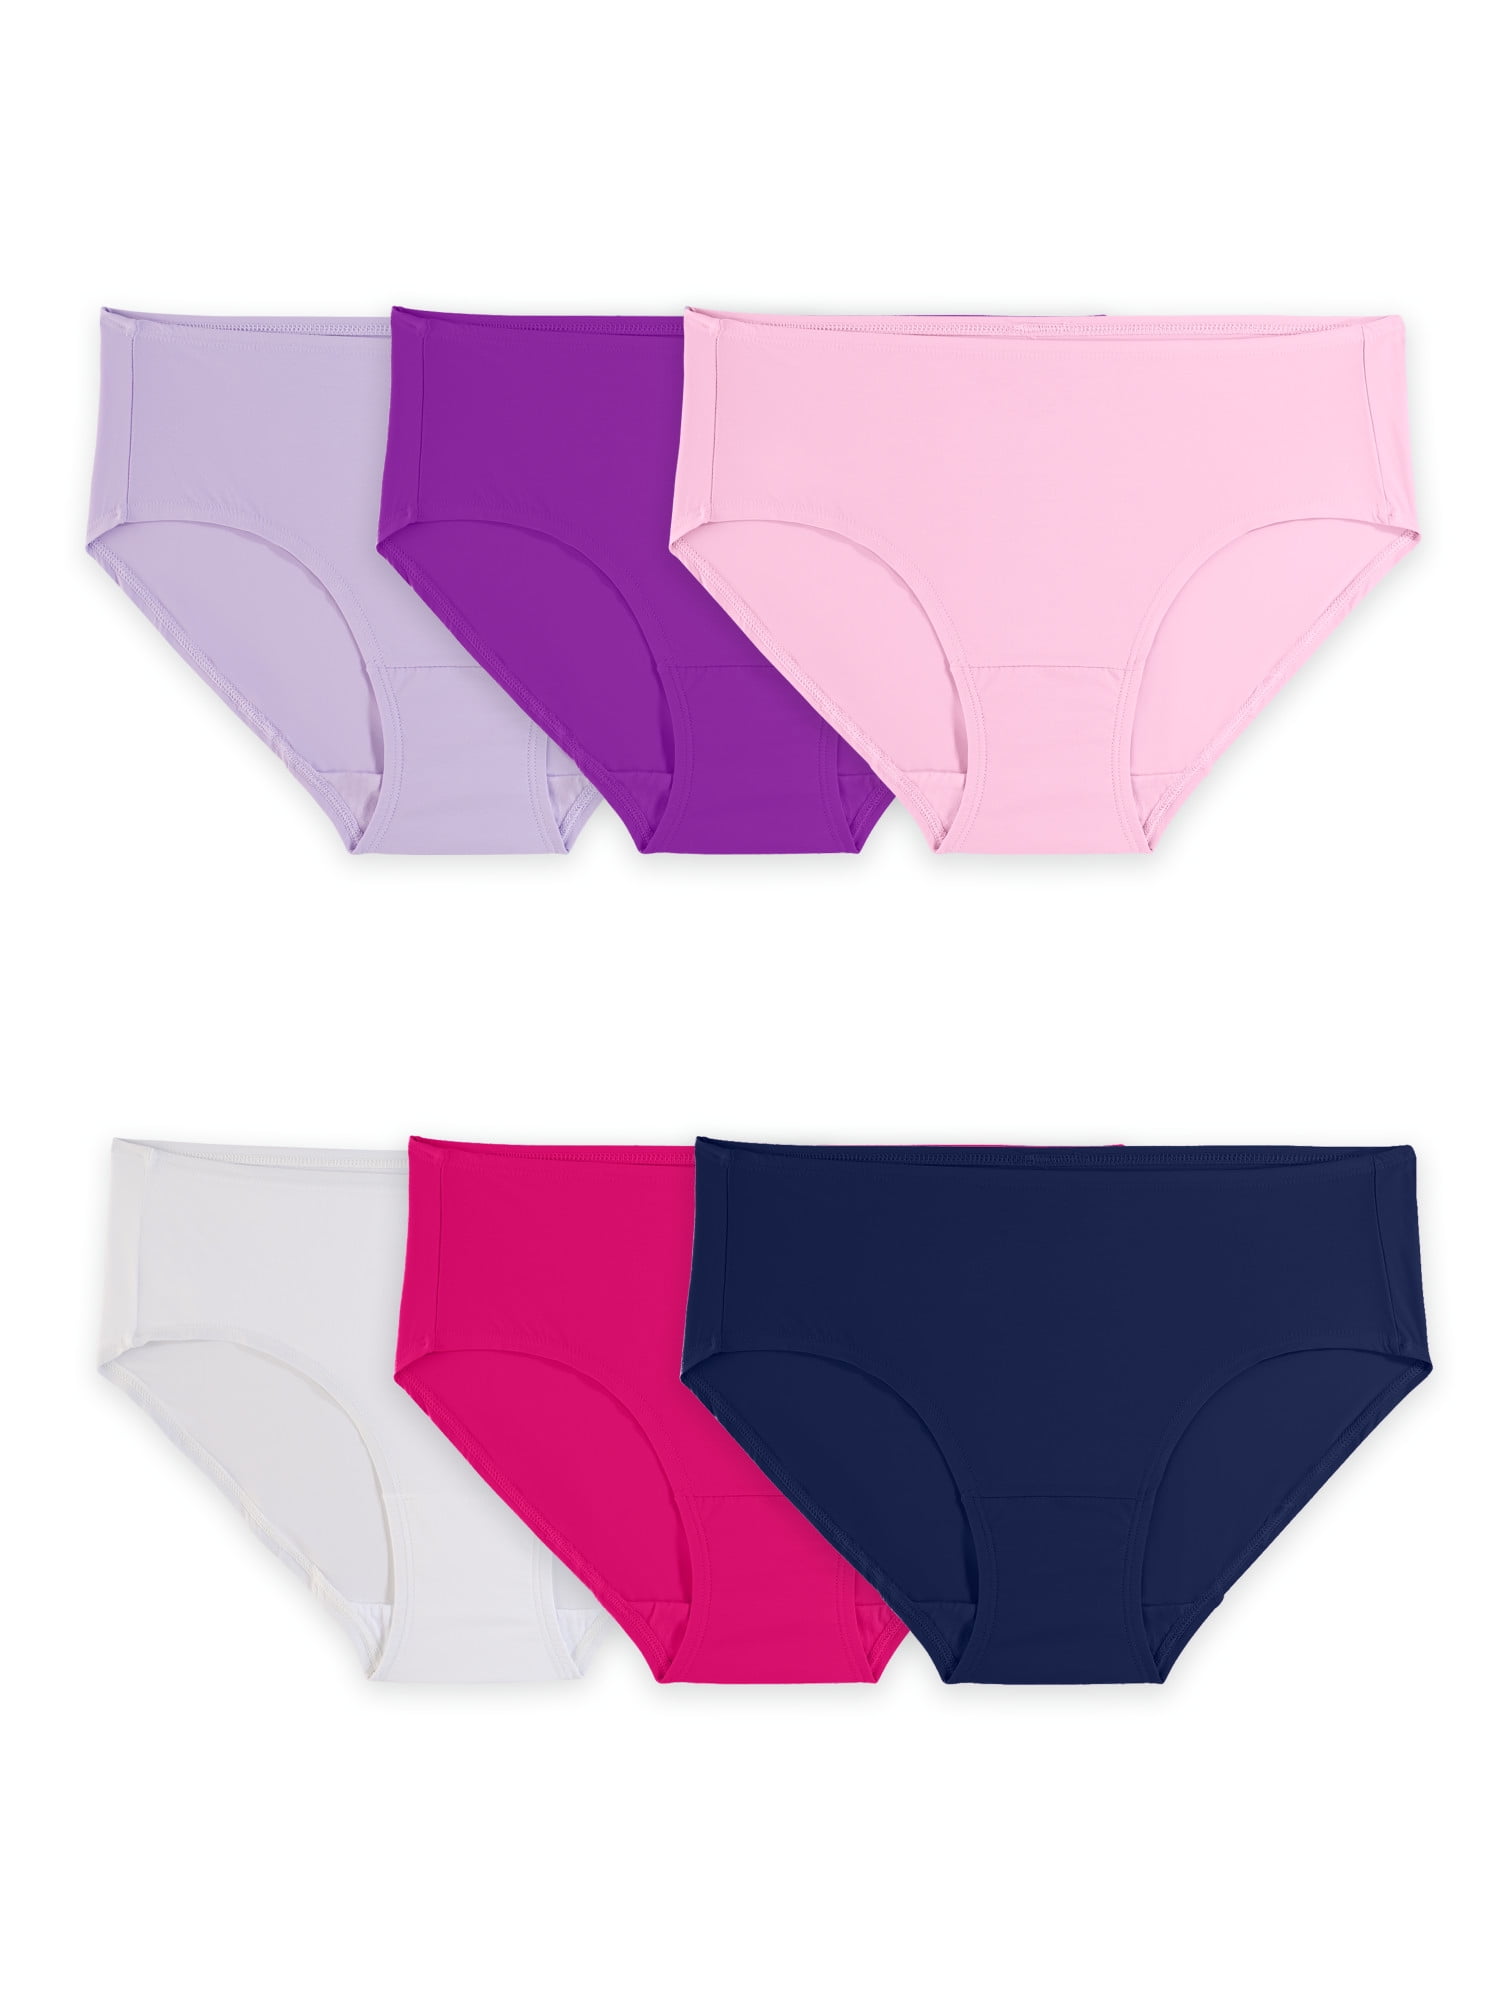 Fruit of the Loom Women's 360 Stretch Microfiber Low-Rise Brief Underwear,  6 Pack